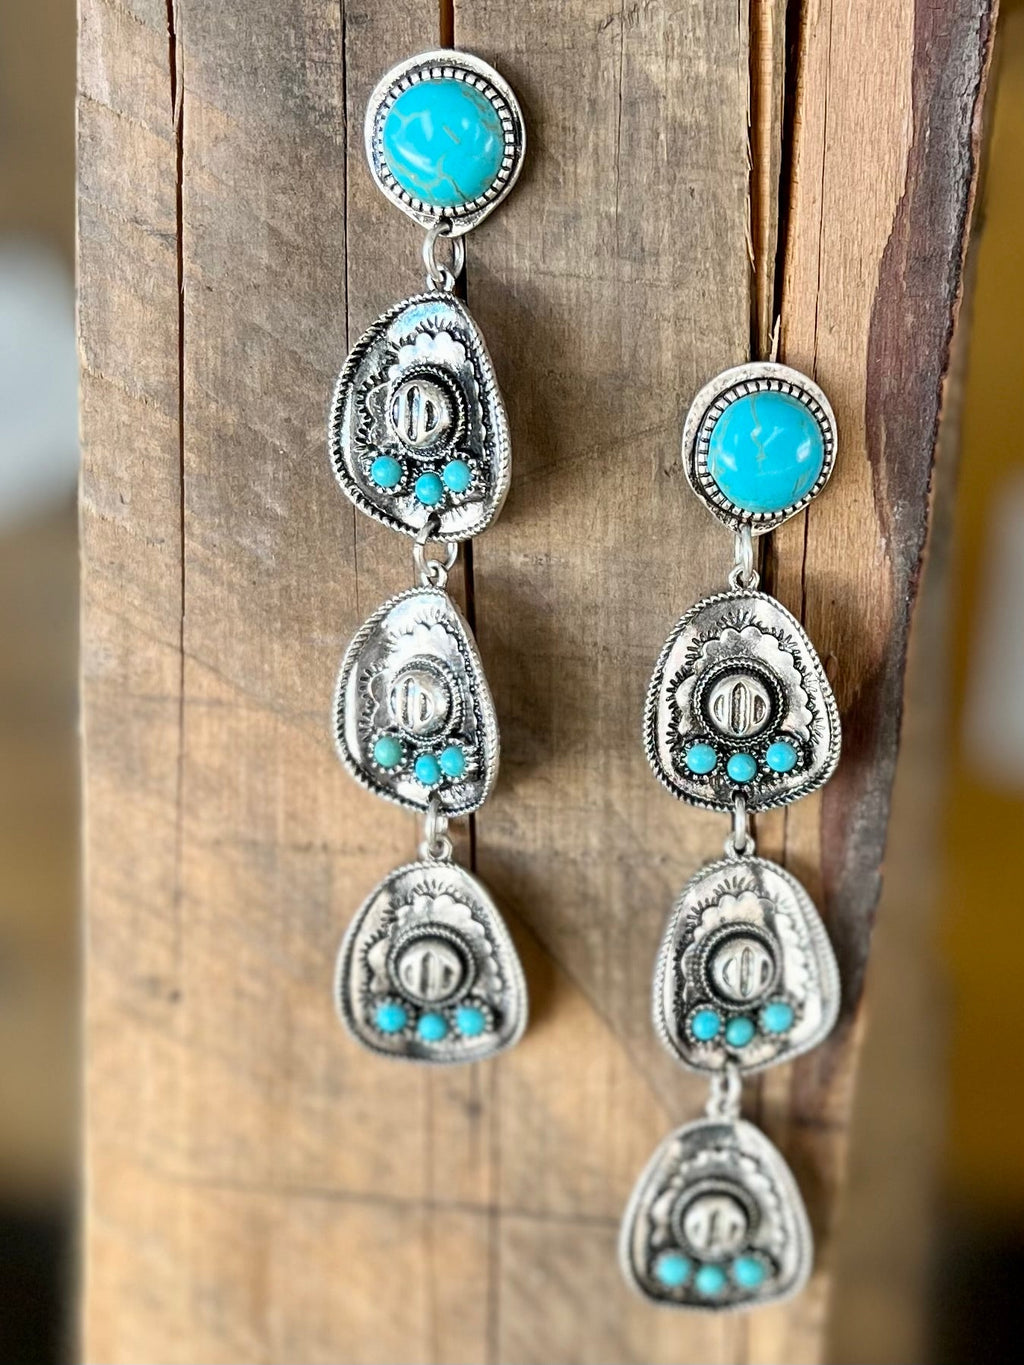 Add some Western flair to any outfit with these stylish Life to Hang Your Hat On Earrings! Not only are they the perfect way to add a pop of daring color to your look, but they also feature a cool cowboy hat shape fashioned out of silver and tastefully adorned with turquoise stones. Show the wild, wild west who's boss with these 4" dangle earrings, secured with the classic fish hook closure. Yeehaw!